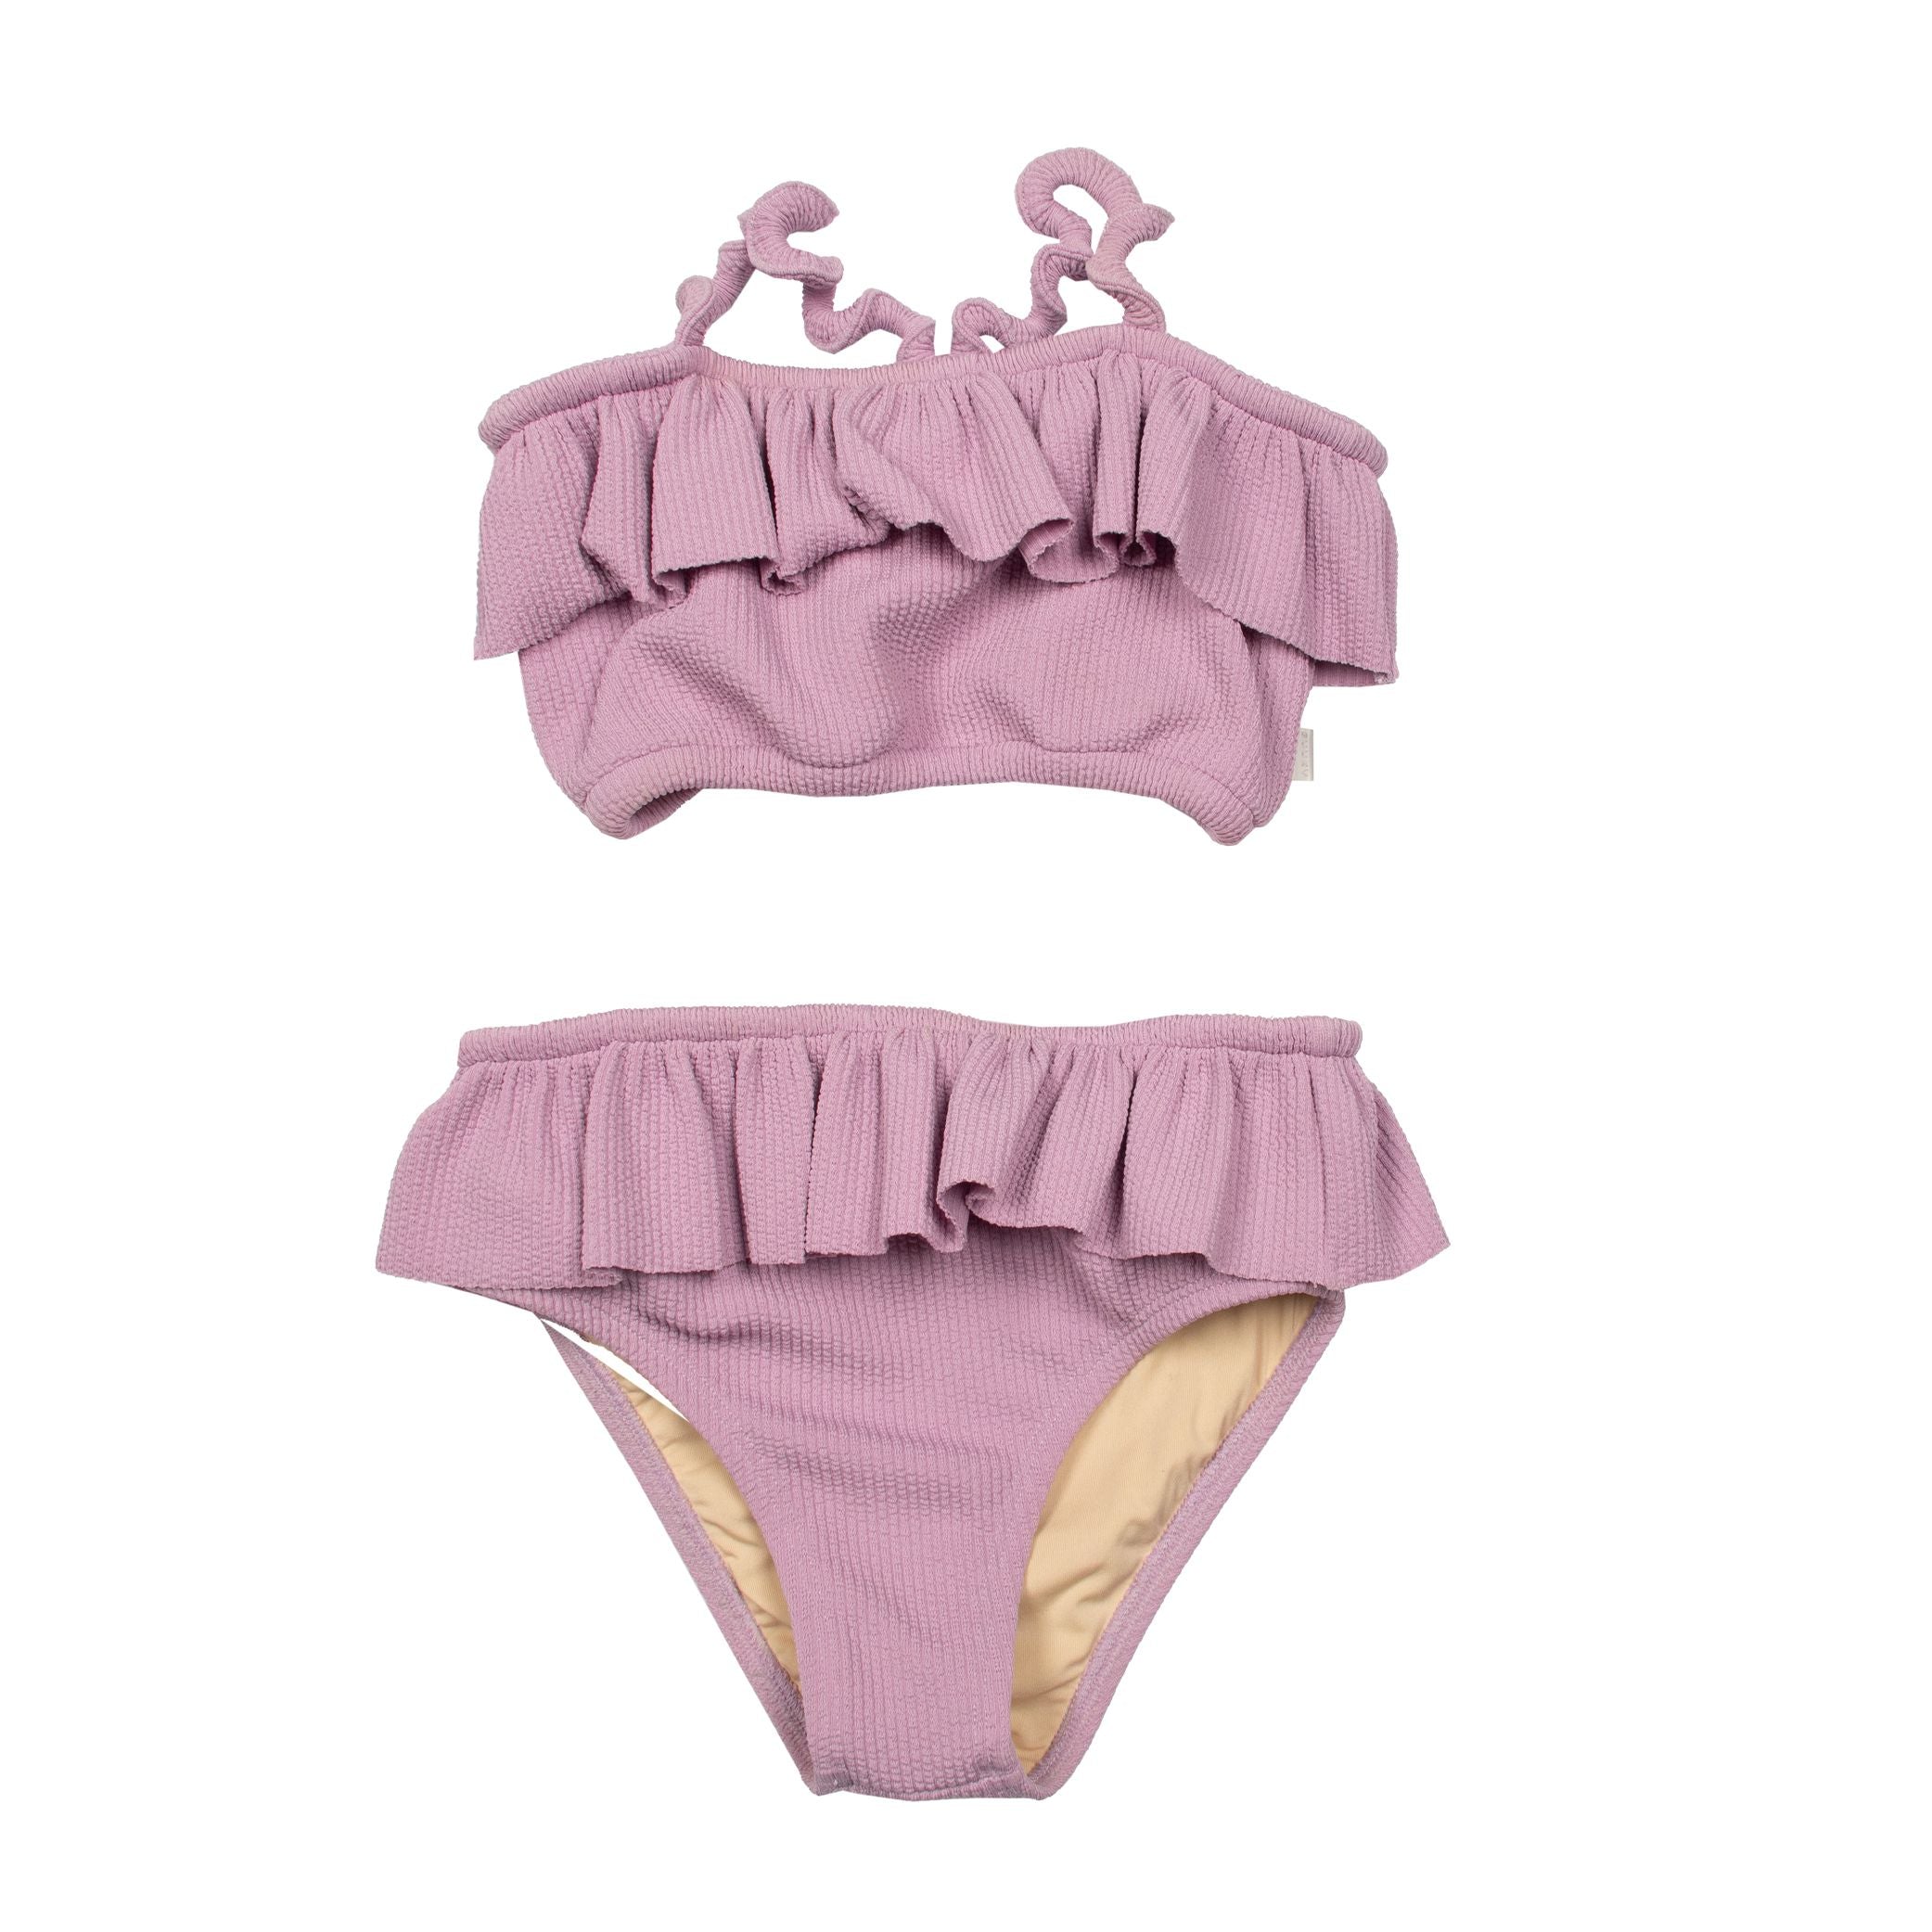 Suuky made in portugal Mauve Frilled Mauve Shell Bikini, a stylish and sustainable swimwear option for children. Crafted from a blend of 16% elastane and 84% recycled polyester. Palm Beach. Size 2y, 4y,6y. Luxury. Eco-friendly kids bathing suit. free shipping to Canada and the US on orders over $100, with standard shipping rates of $6 CAD / $4.30 USD for orders below. Plus, rest assured, duties into the US are included, making your shopping experience hassle-free